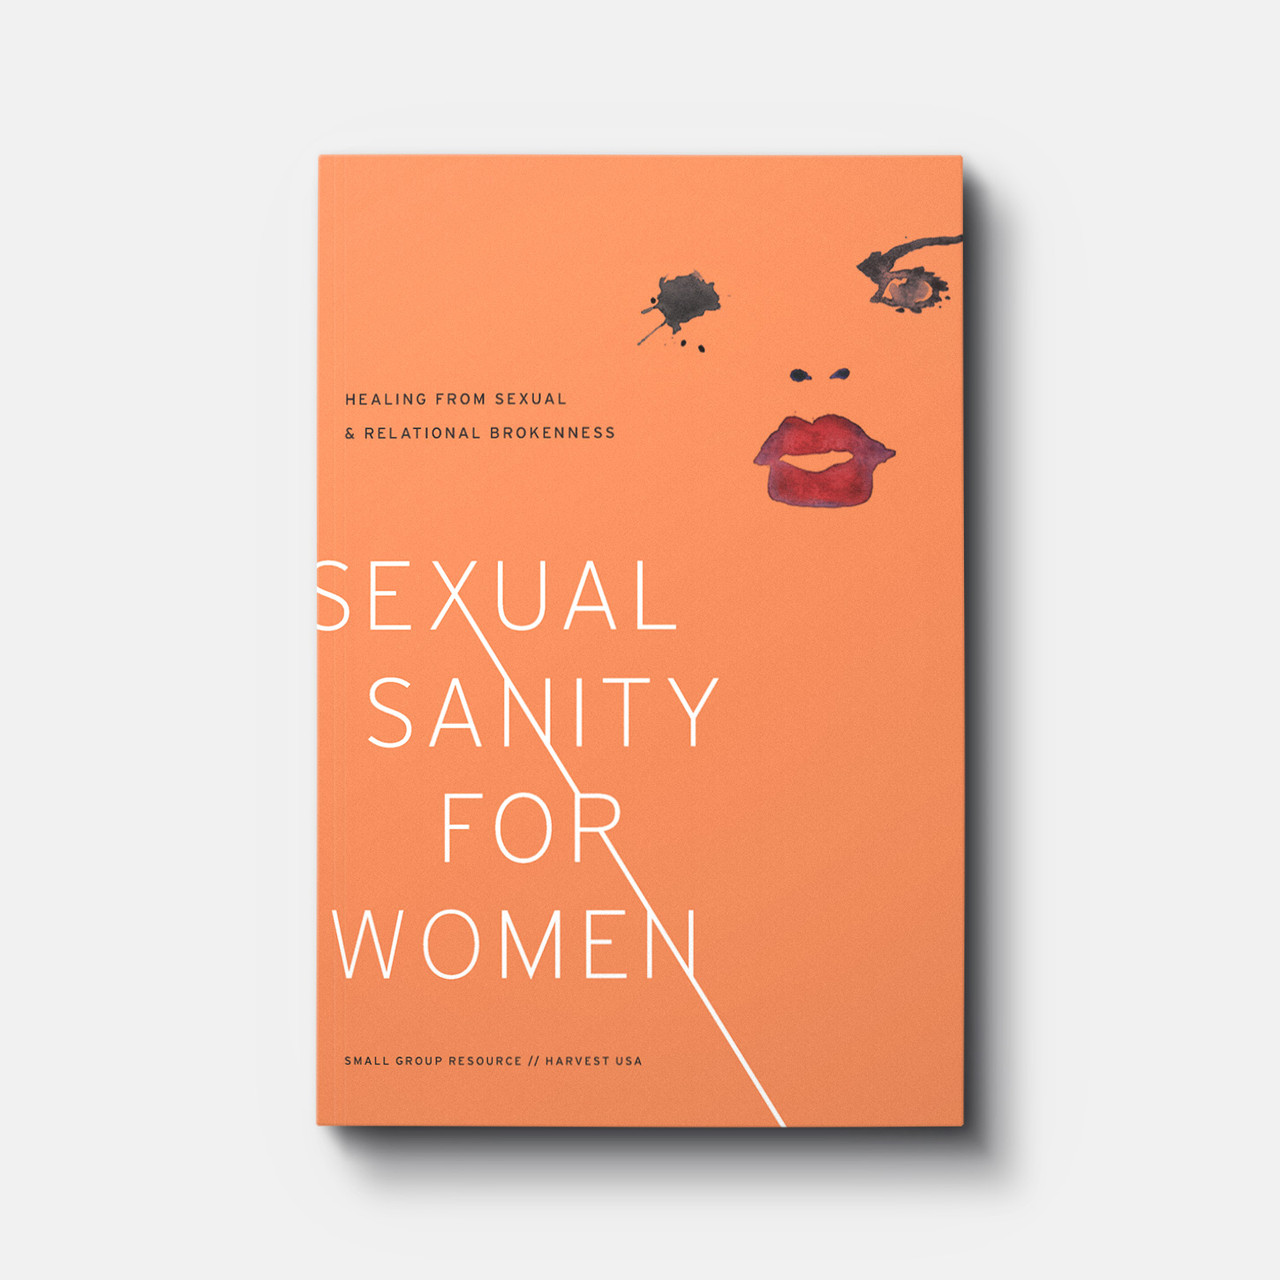 Buy Sexual Sanity for Women, Healing from Sexual and Relational Brokenness Topical Studies